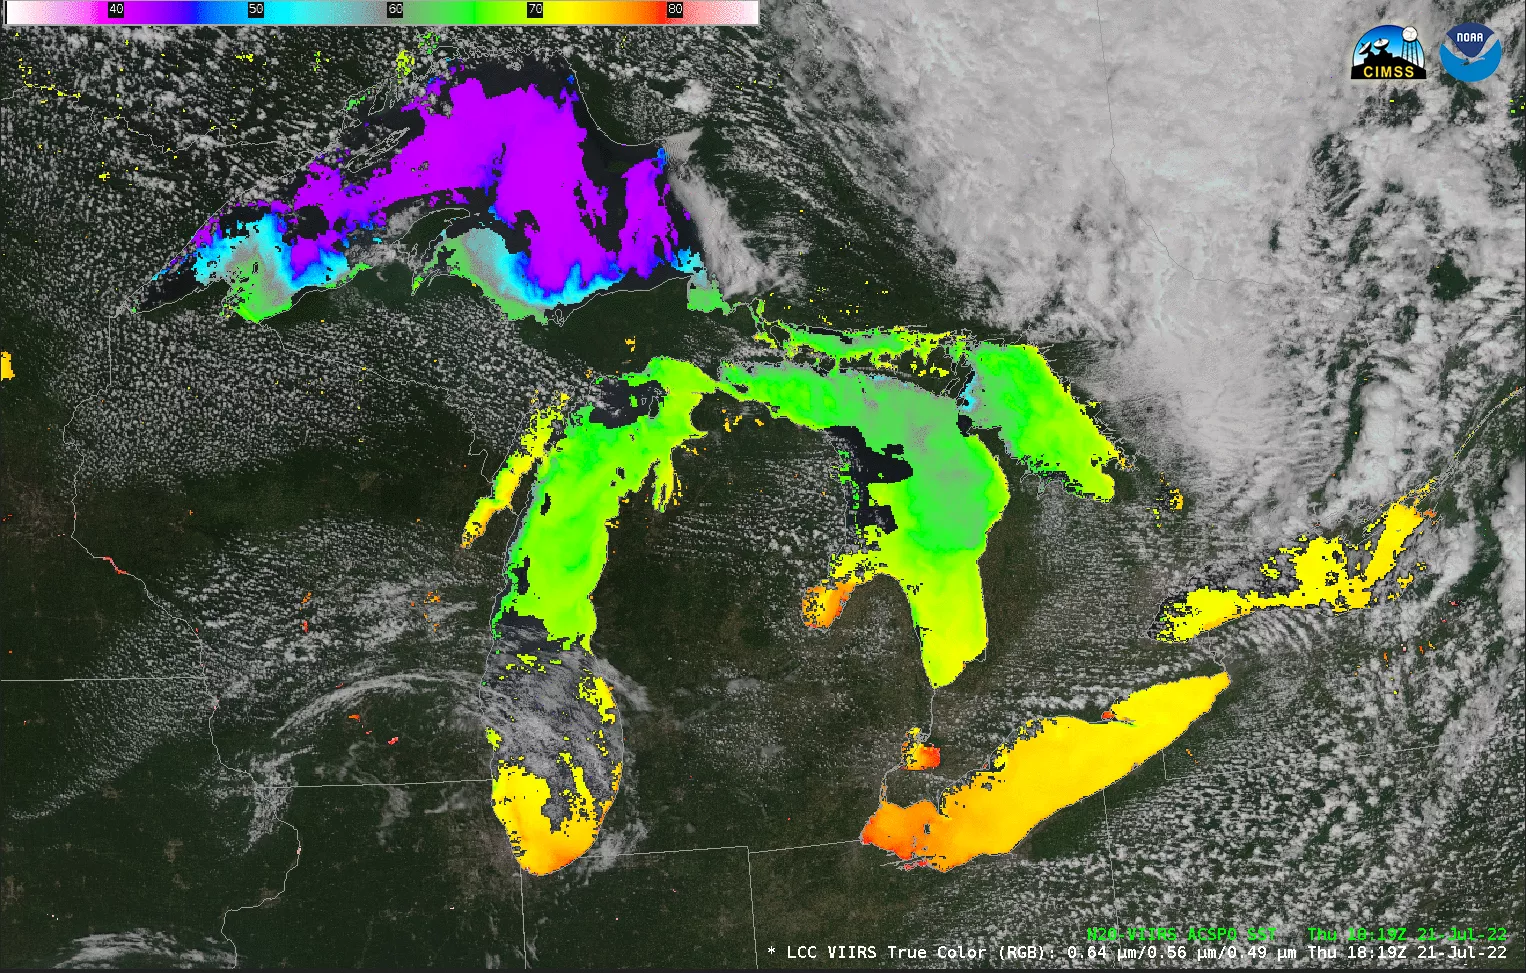 Image of the great lakes with infrared imagery